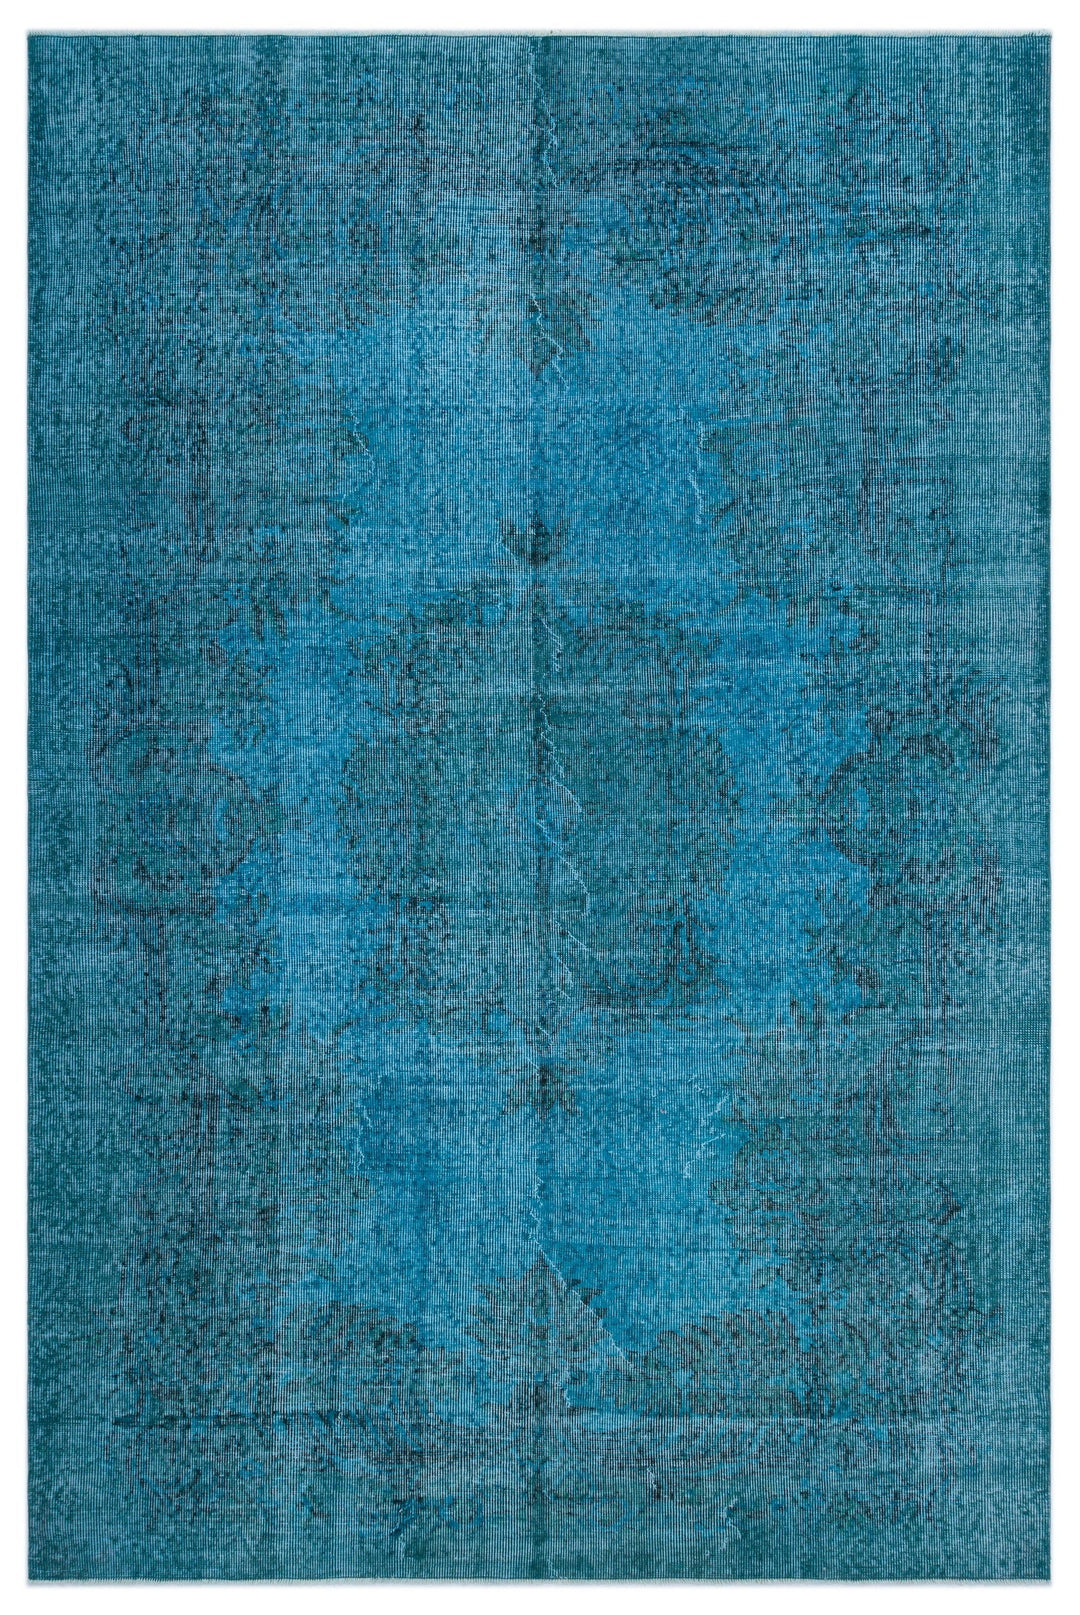 Athens Turquoise Tumbled Wool Hand Woven Carpet 183 x 277